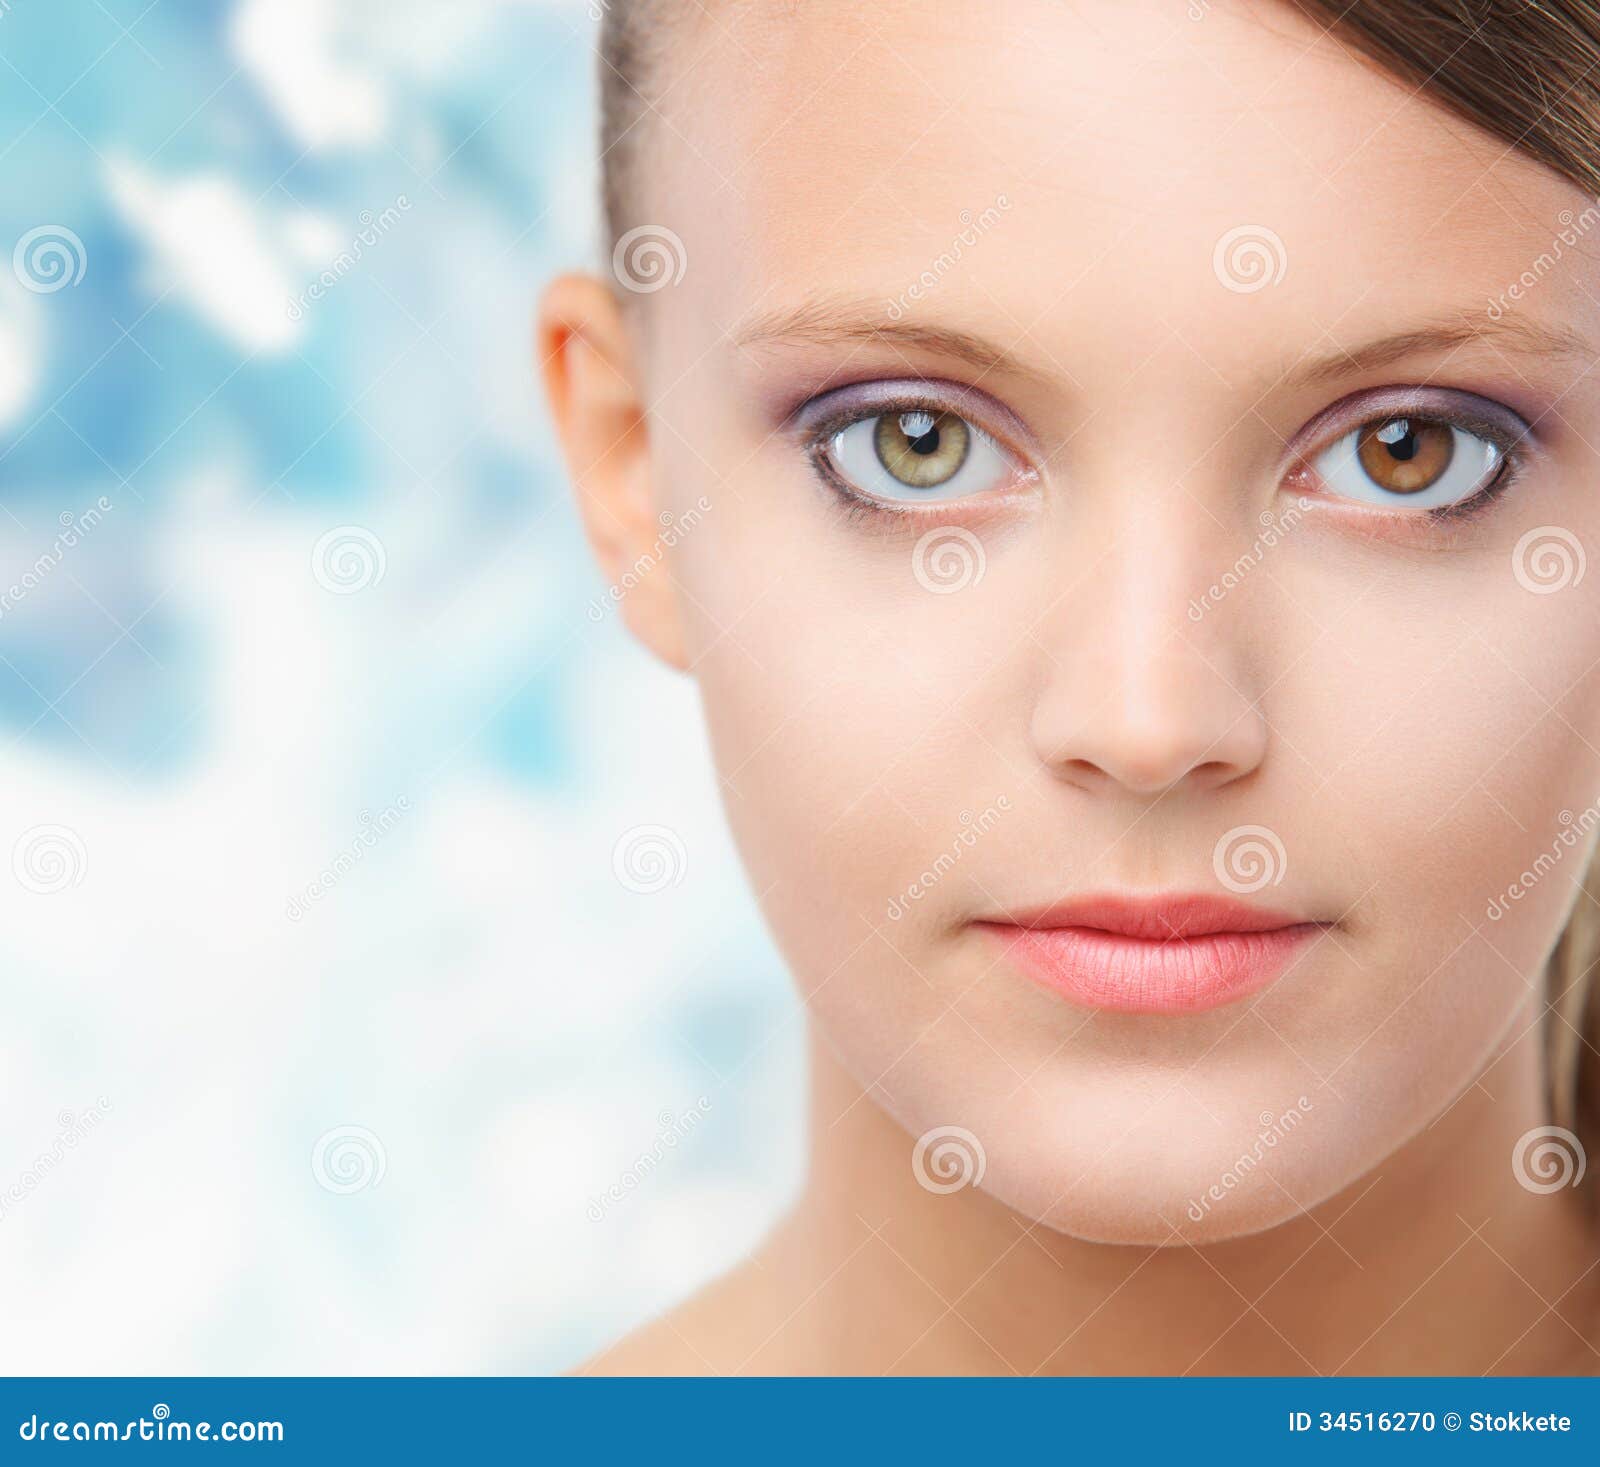 natural-beauty-young-woman-health-skin-portrait-face-34516270.jpg